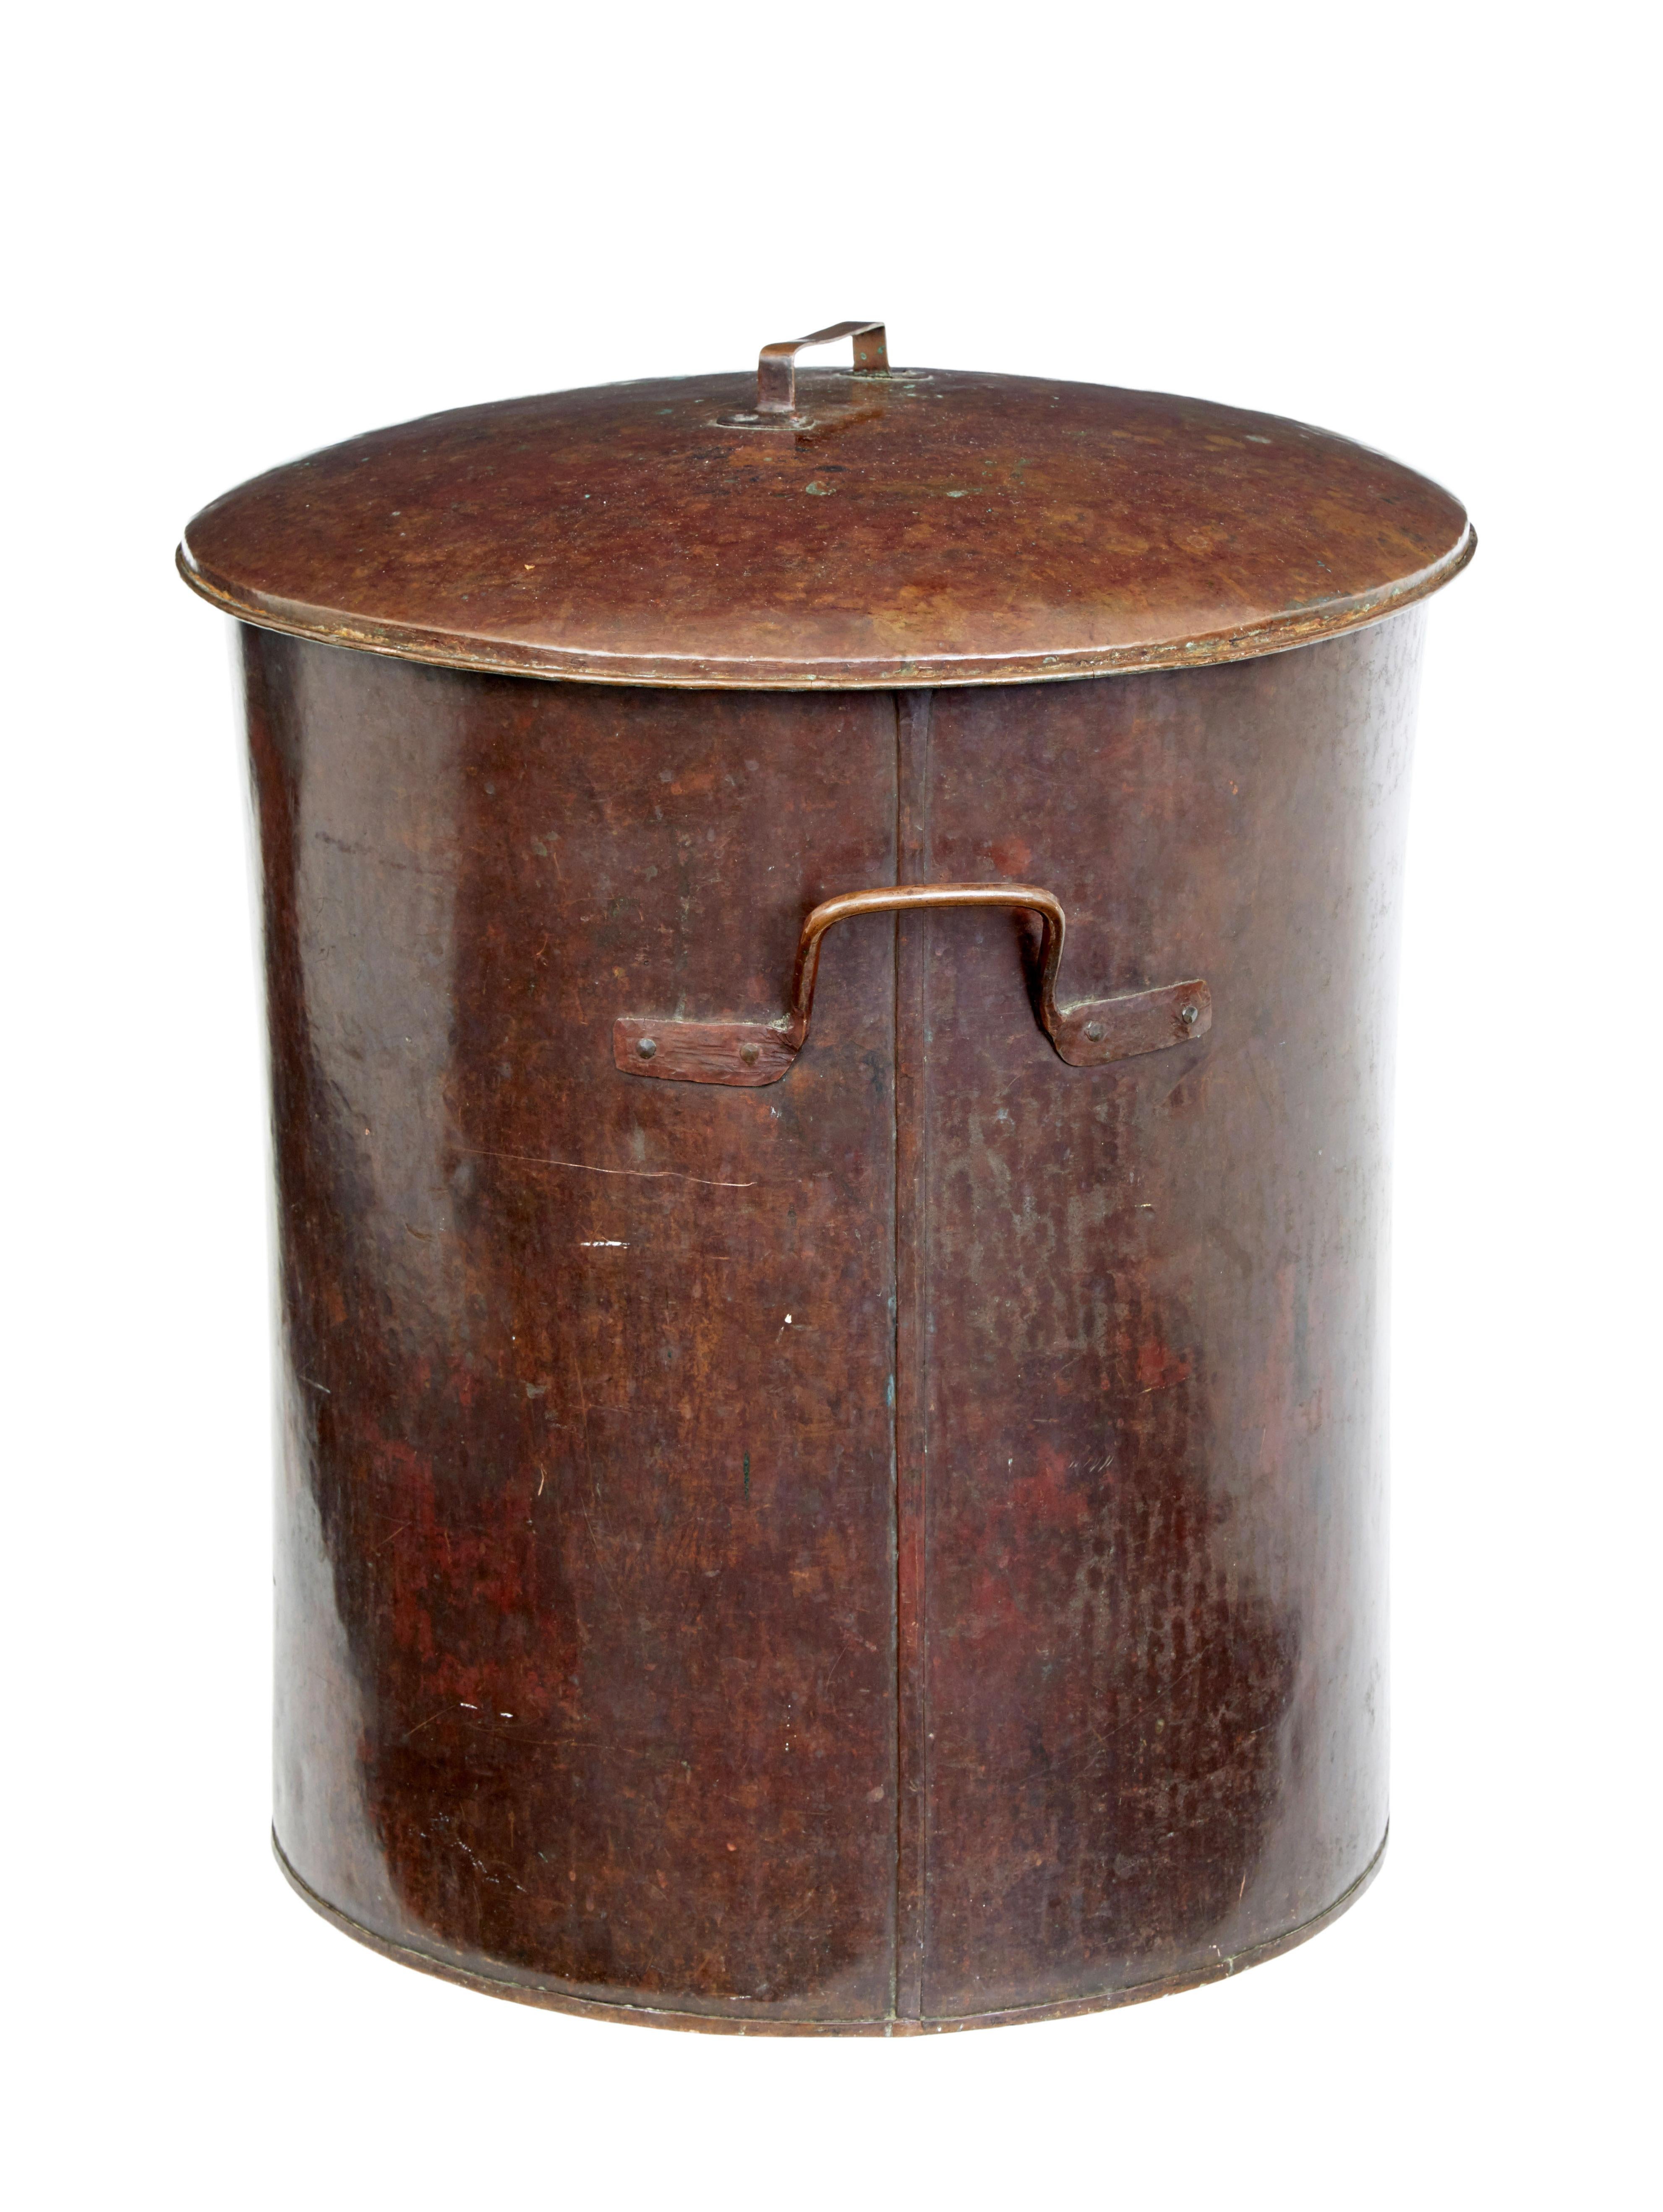 Large 19th century copper milk vessel, circa 1890.

Rare to find a piece like this with its original lid. Hand beaten to shaped with attached handles to sides and lid. Zinc lined interior. Ideal for use as a log bin or storage.

Minor surface